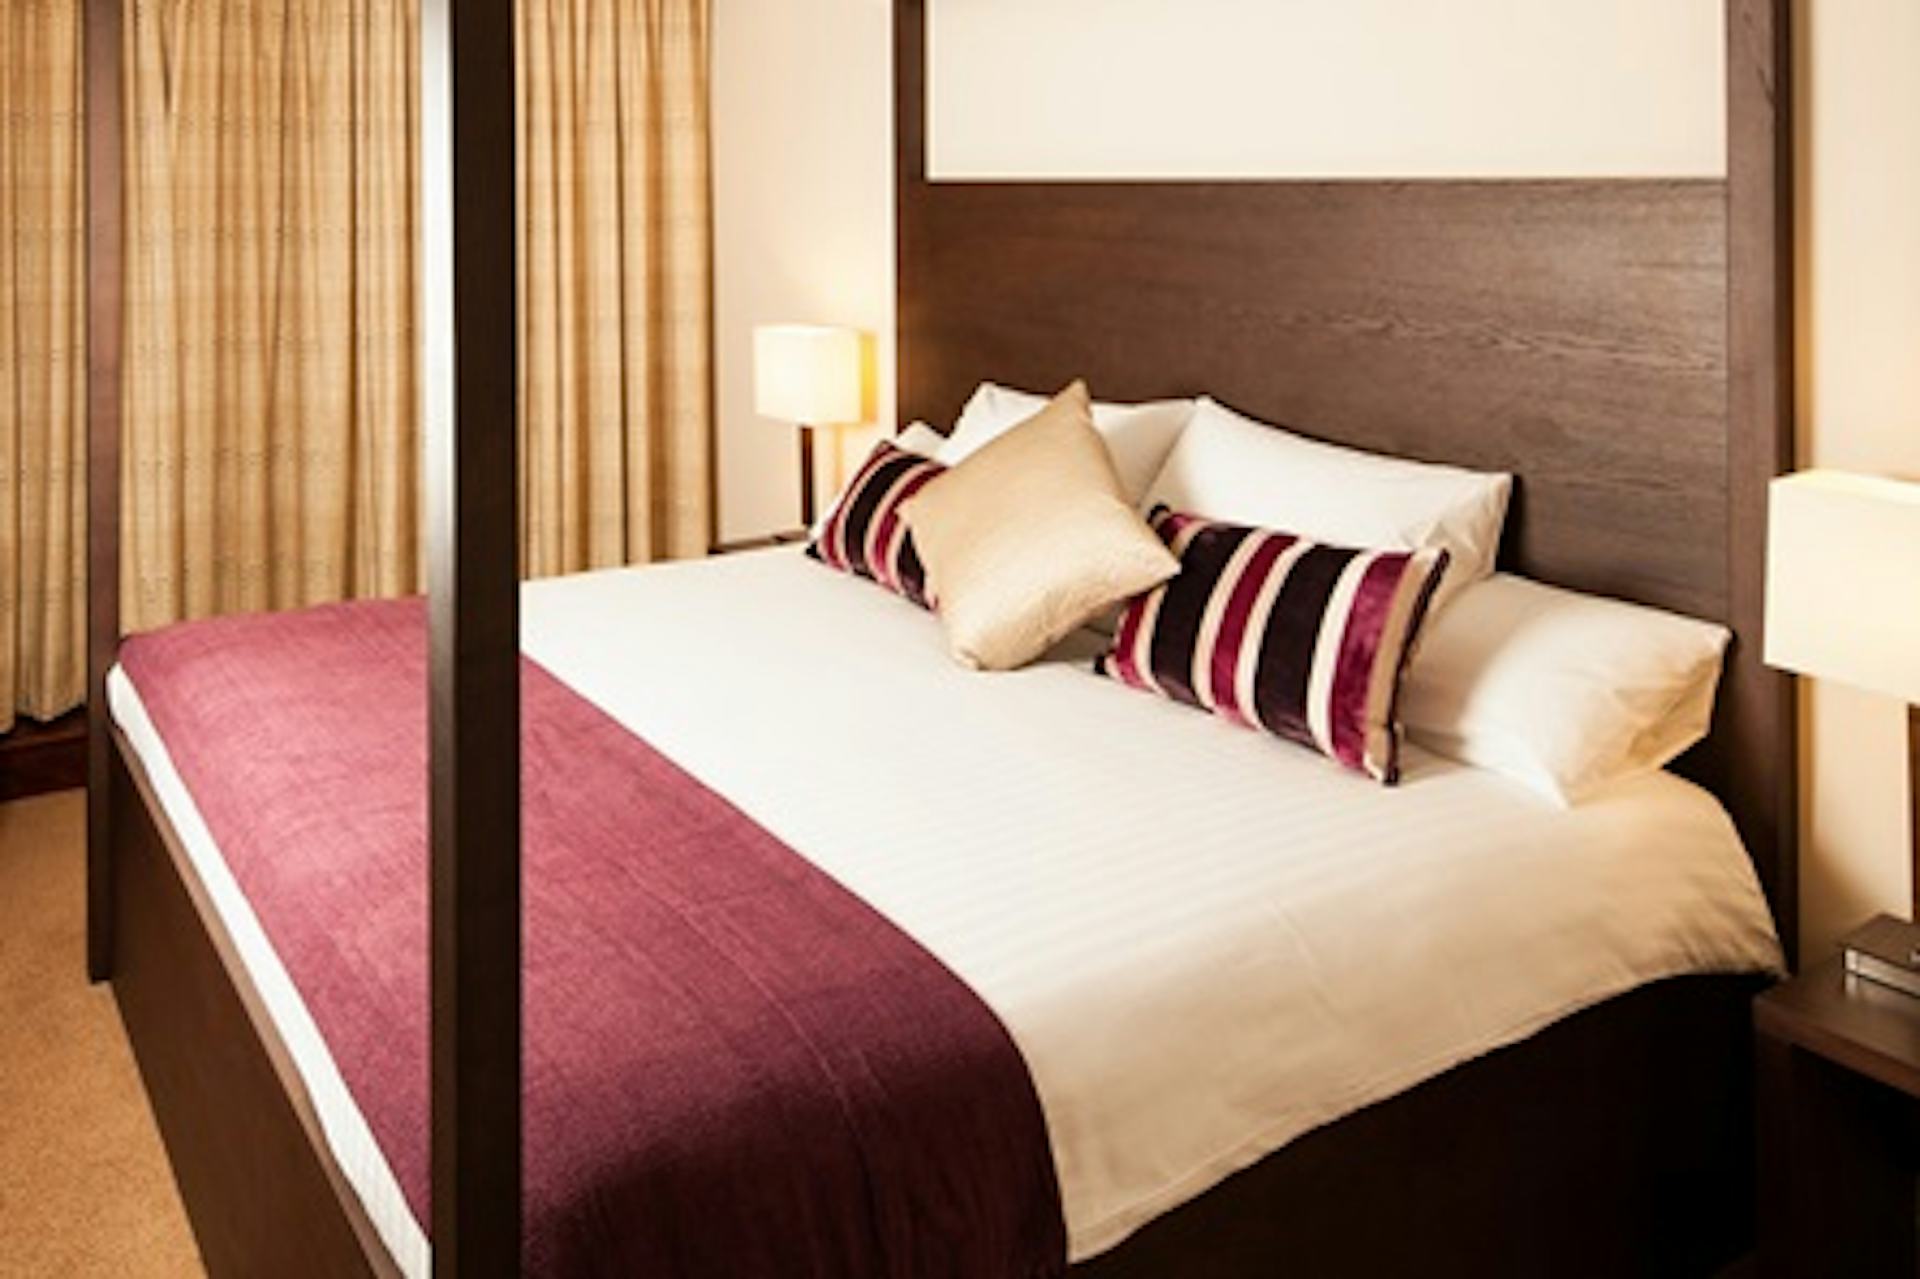 One Night Break for Two at the Mercure Maidstone Great Danes Hotel